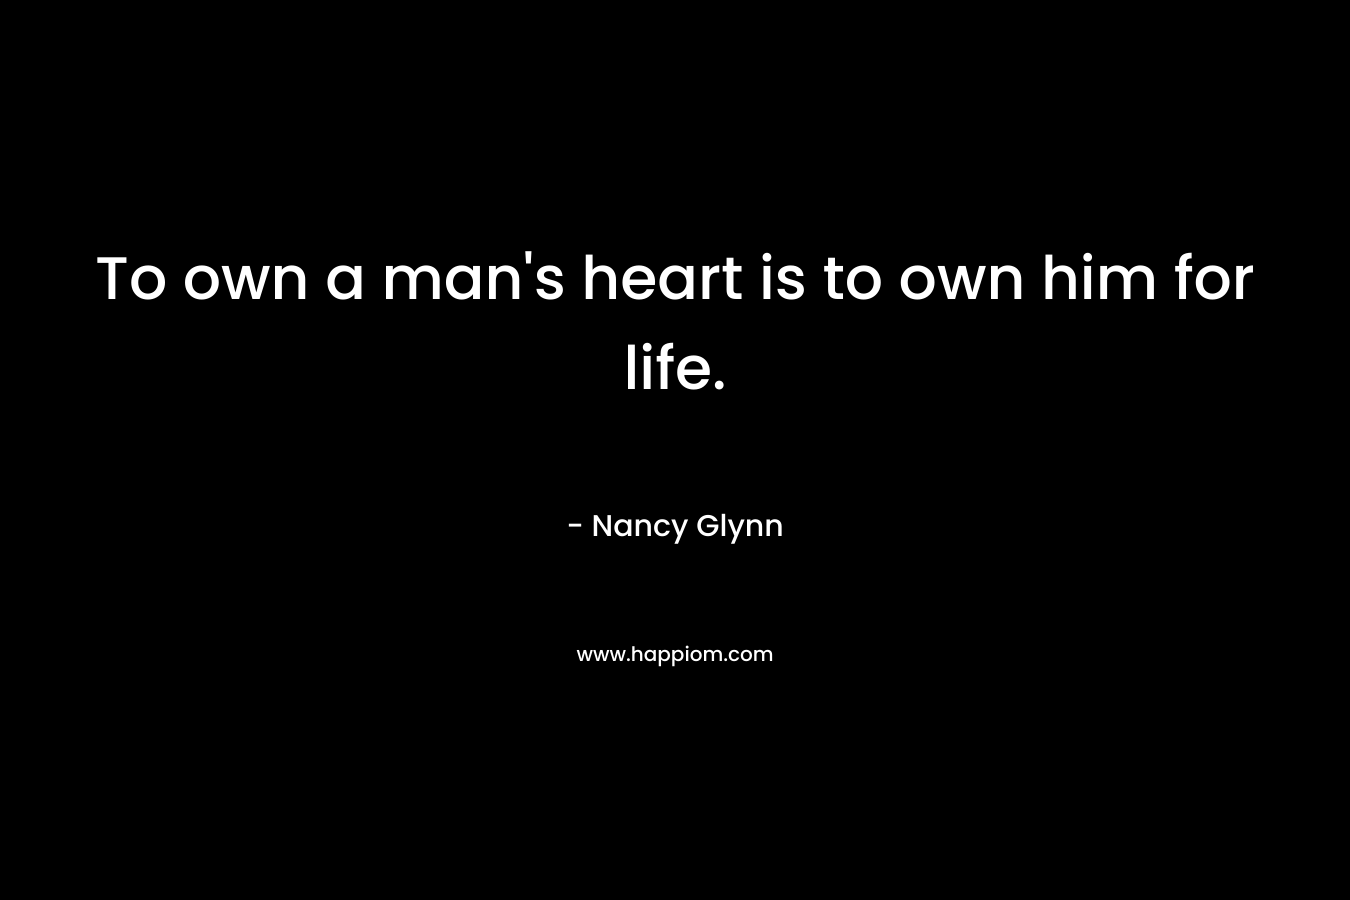 To own a man's heart is to own him for life.